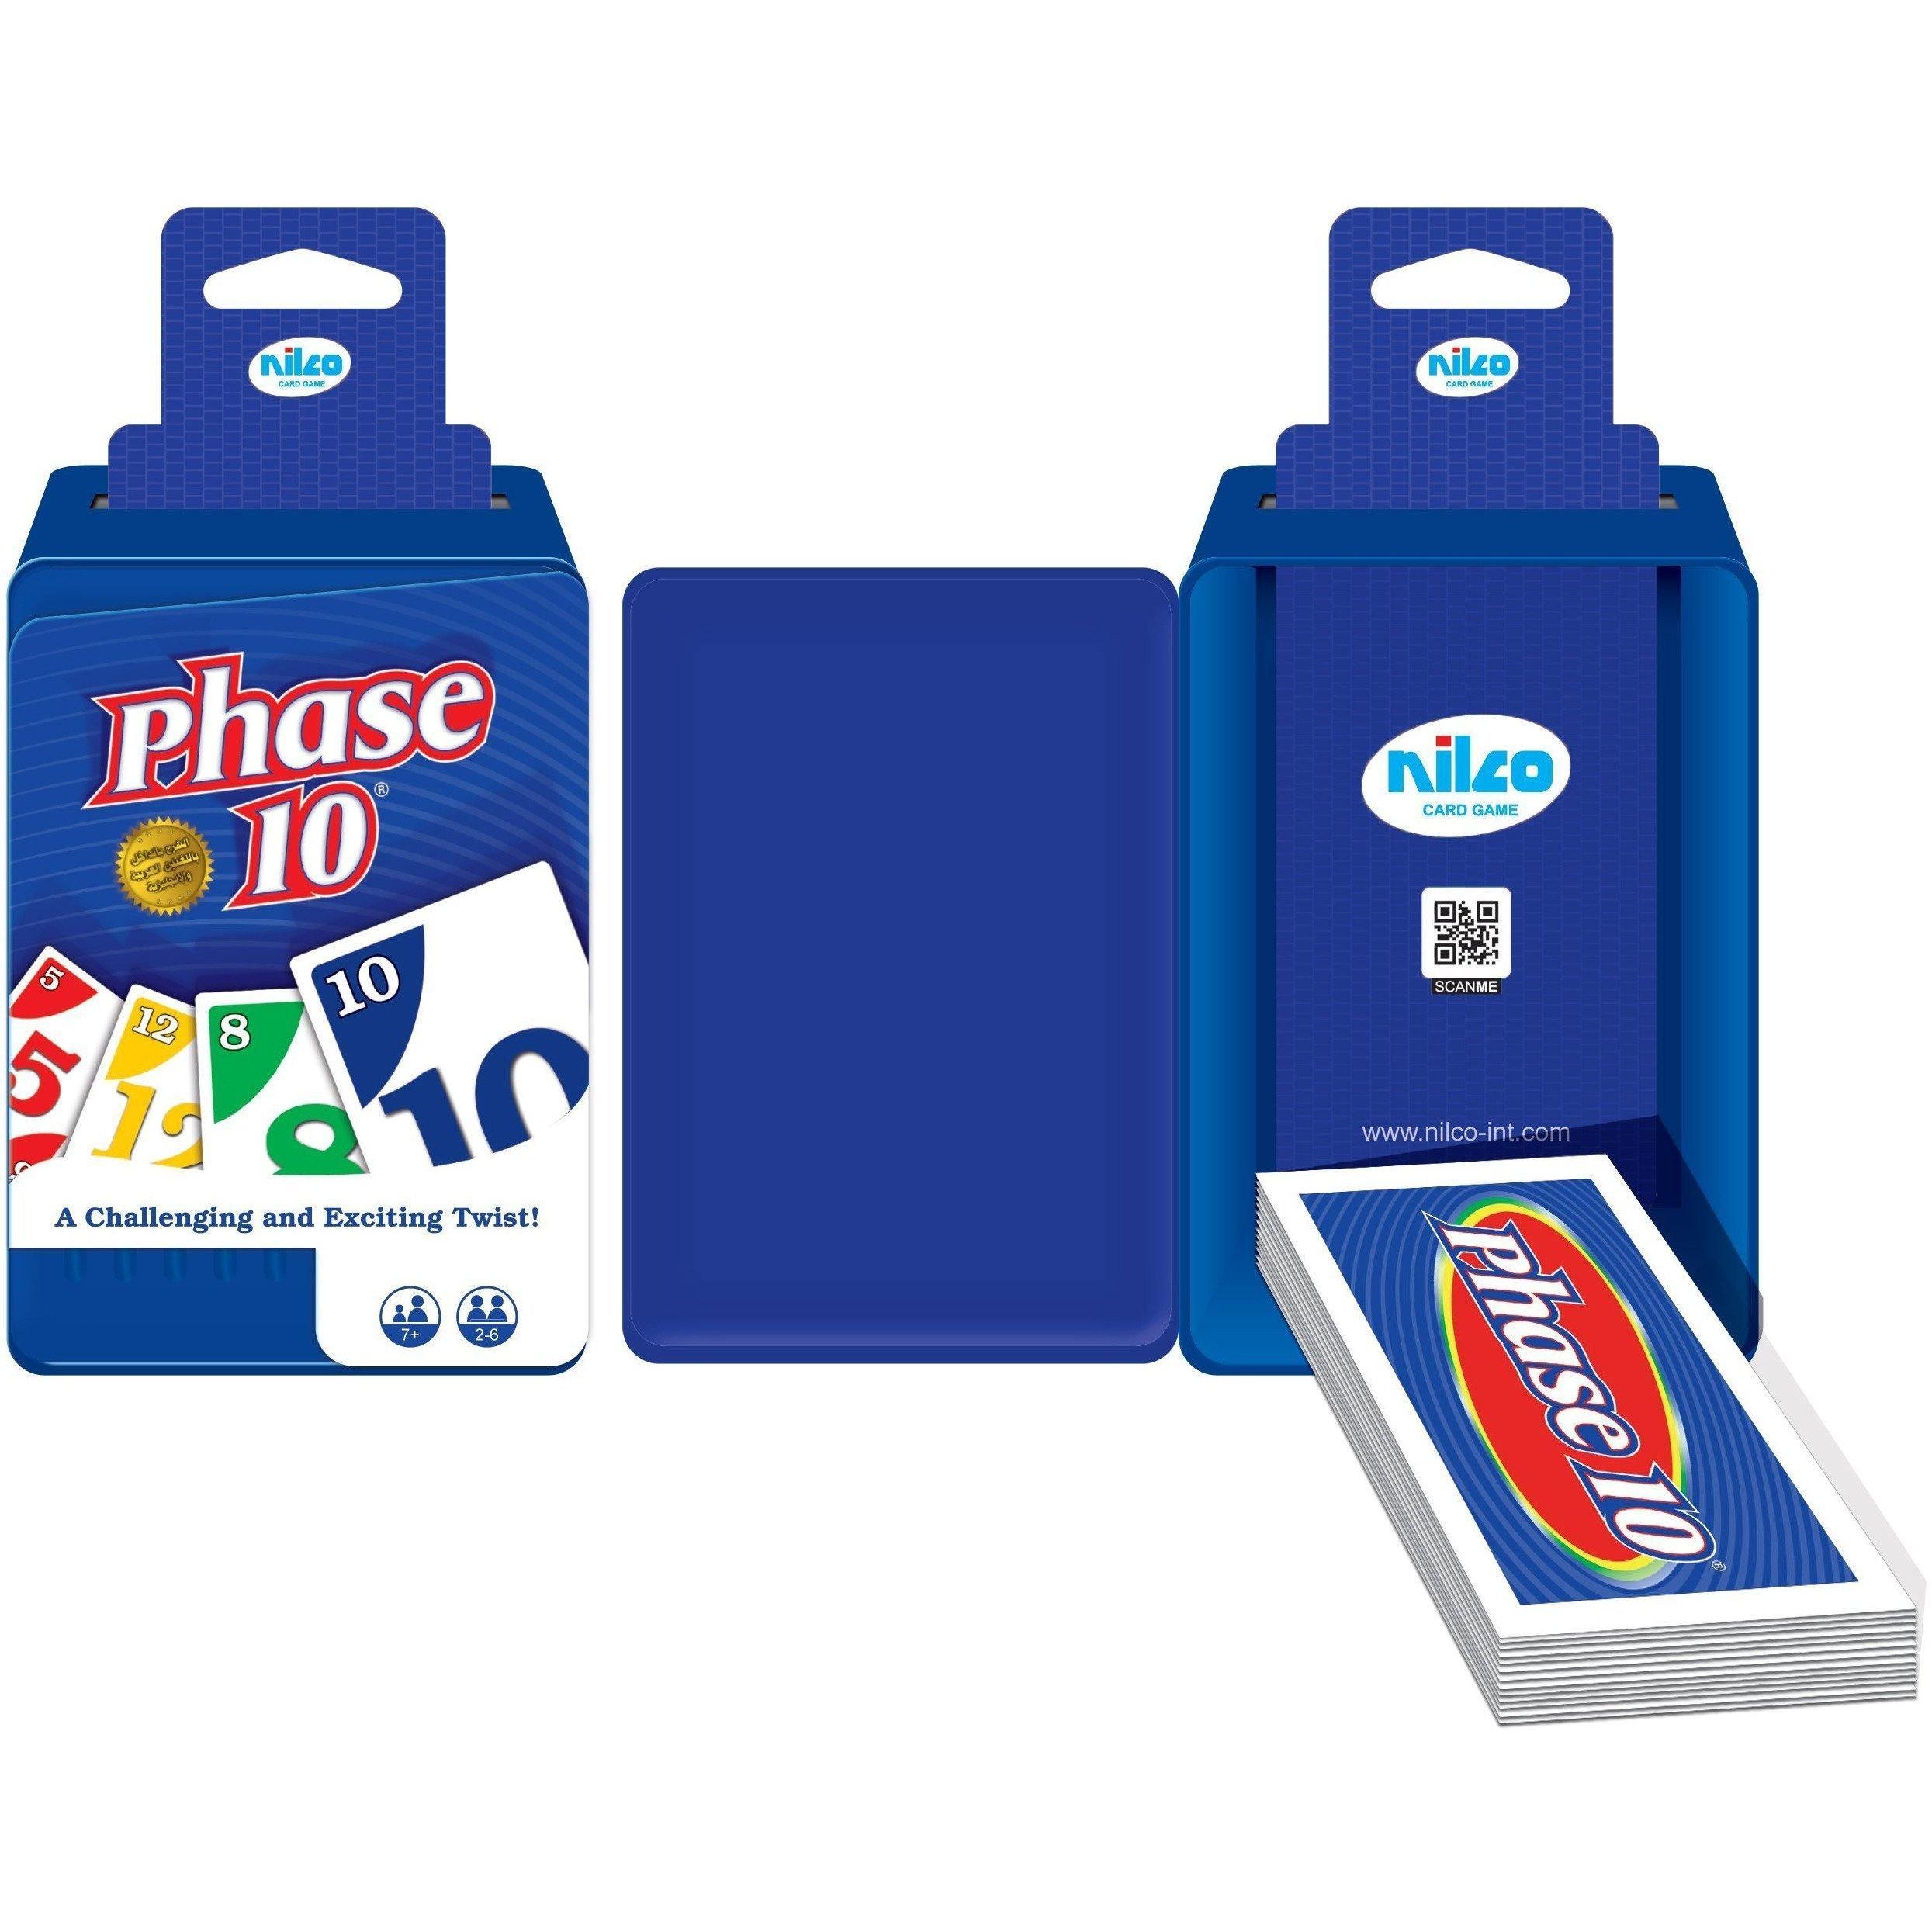 Nilco 11142 Phase 10 Travel Plastic Box Card Game - BumbleToys - 8-13 Years, Card & Board Games, Nilco, Puzzle & Board & Card Games, Unisex